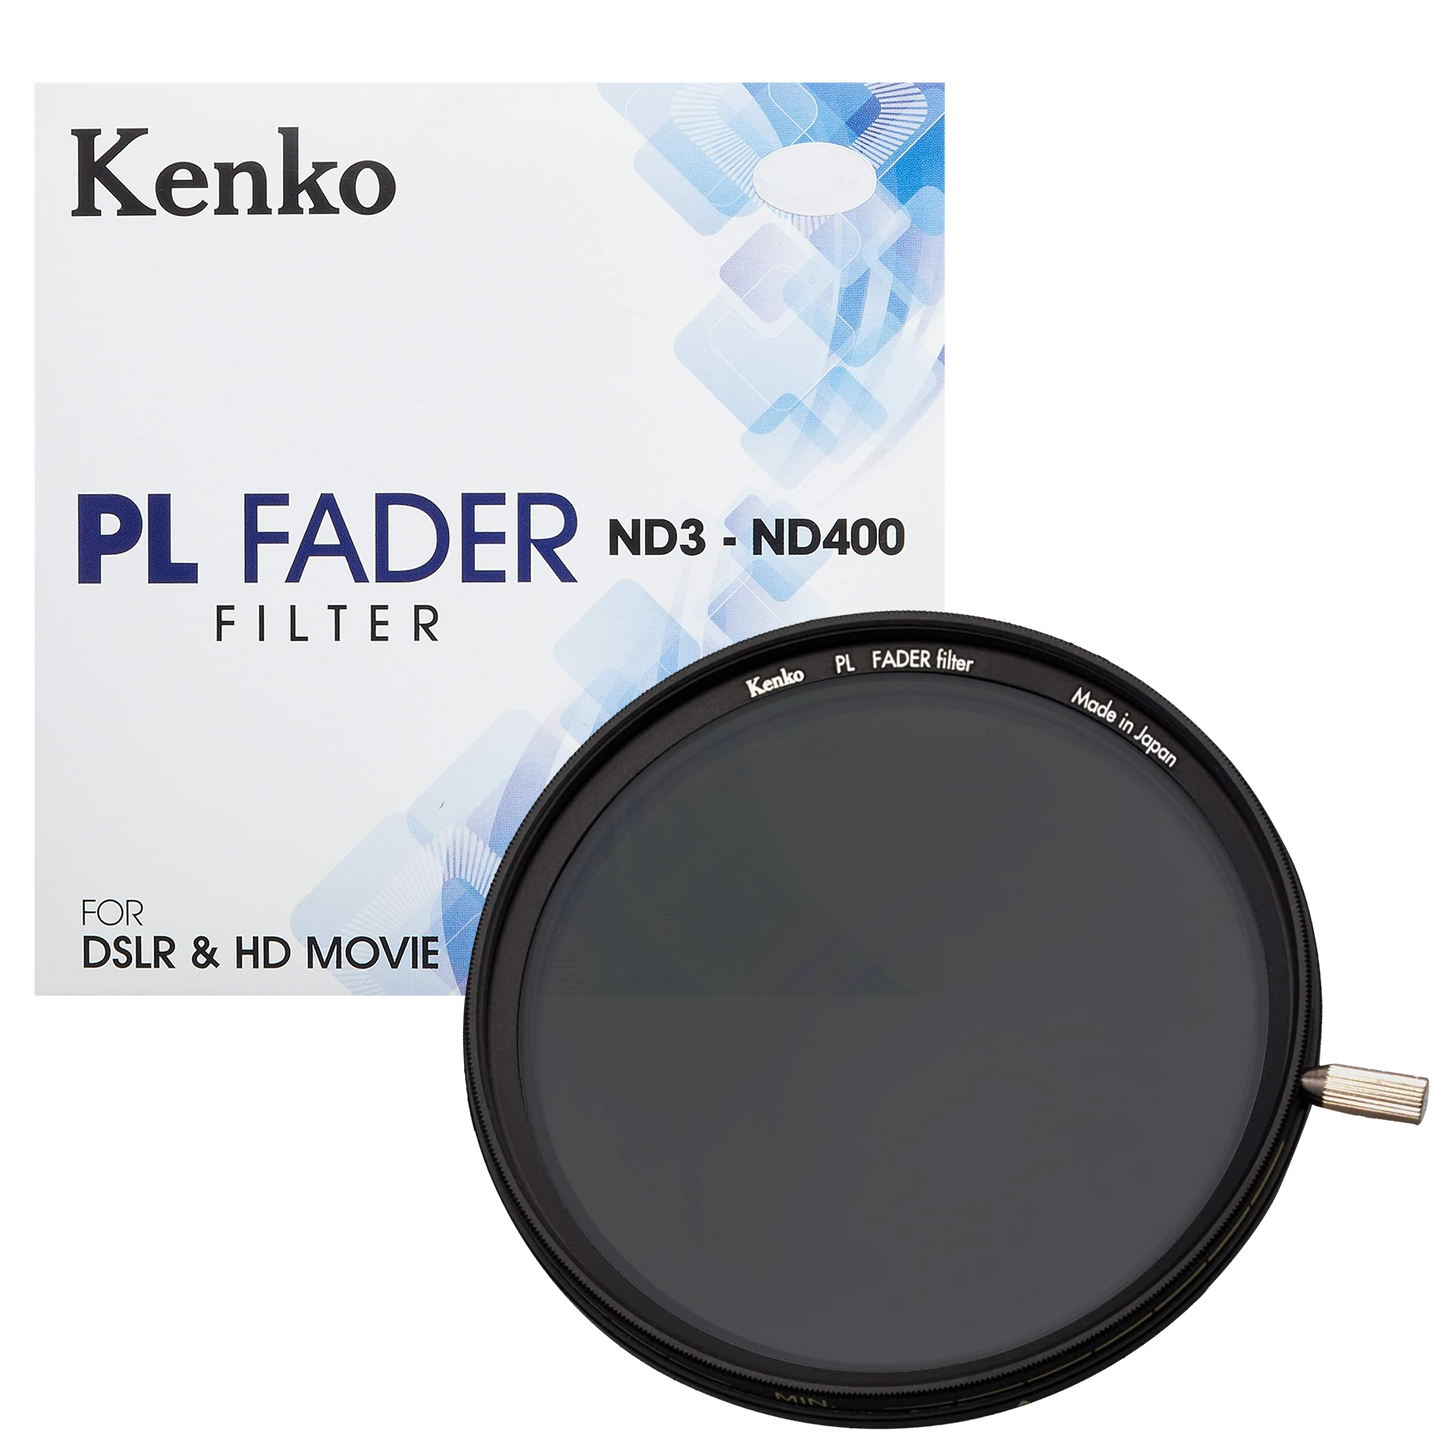 Kenko ND Filter PL Fader, Variable ND, ND3-ND400